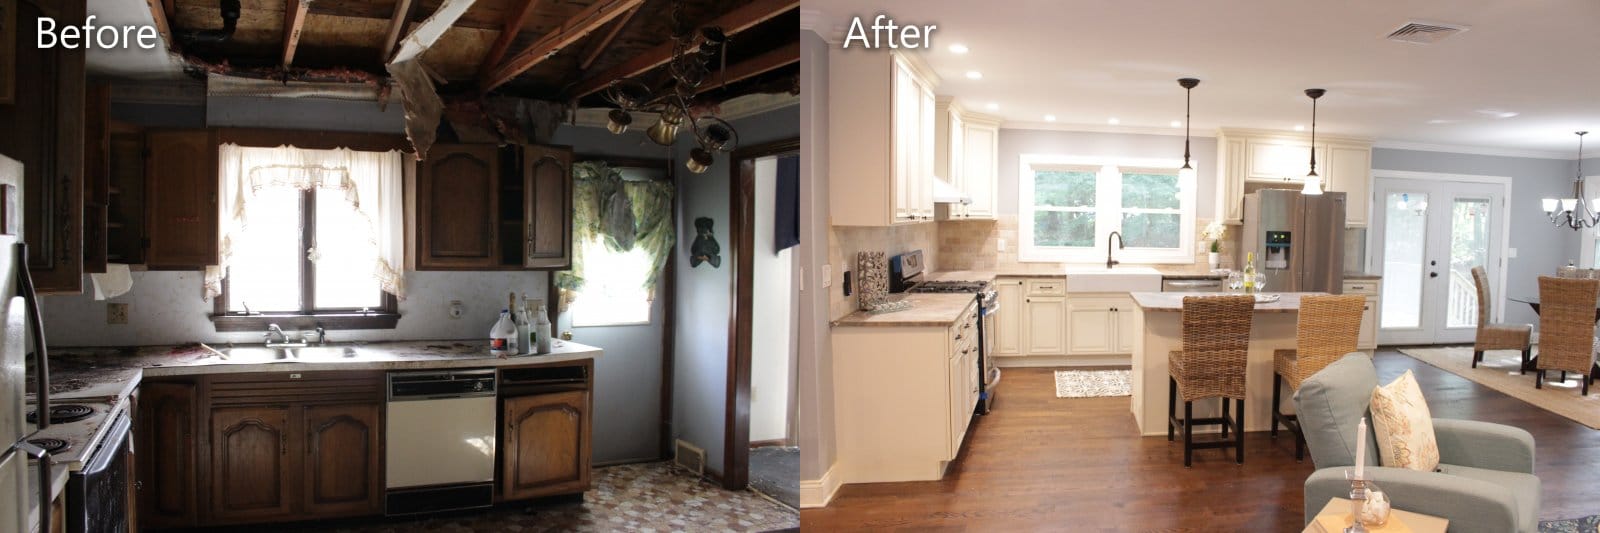 Before and after Kitchen Renovation